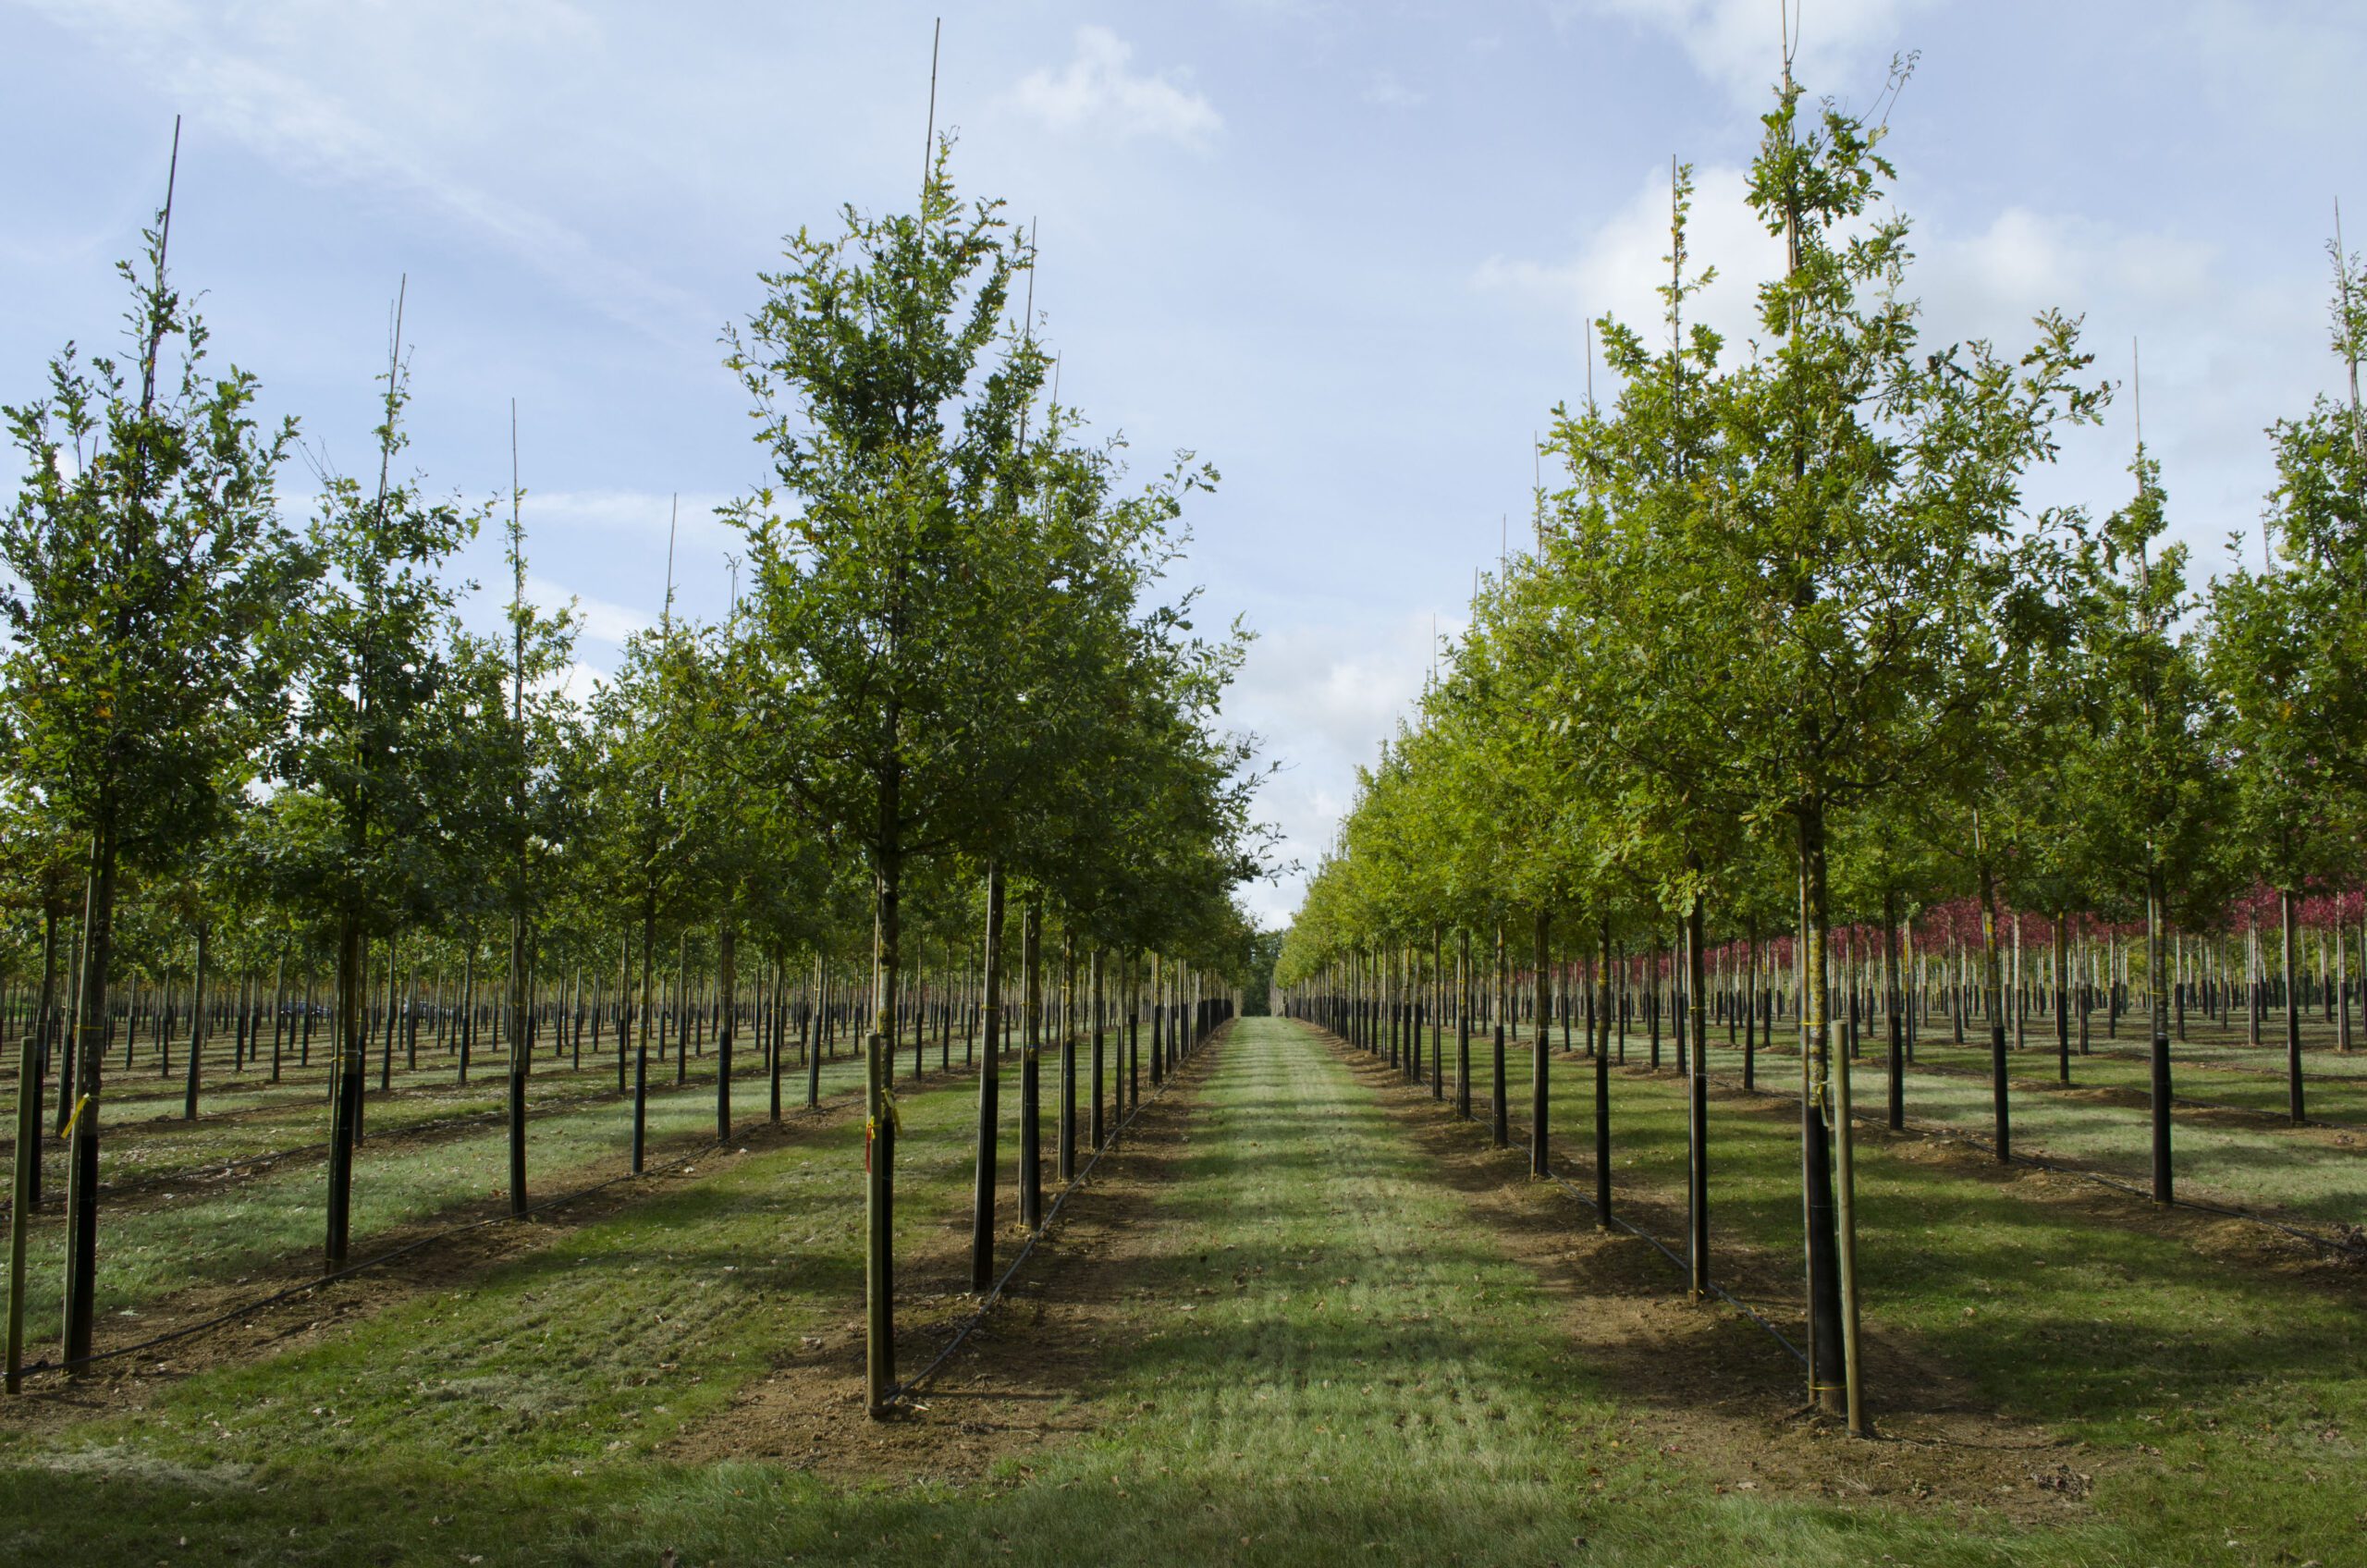 Quercus robur semi mature trees growing in rows in field